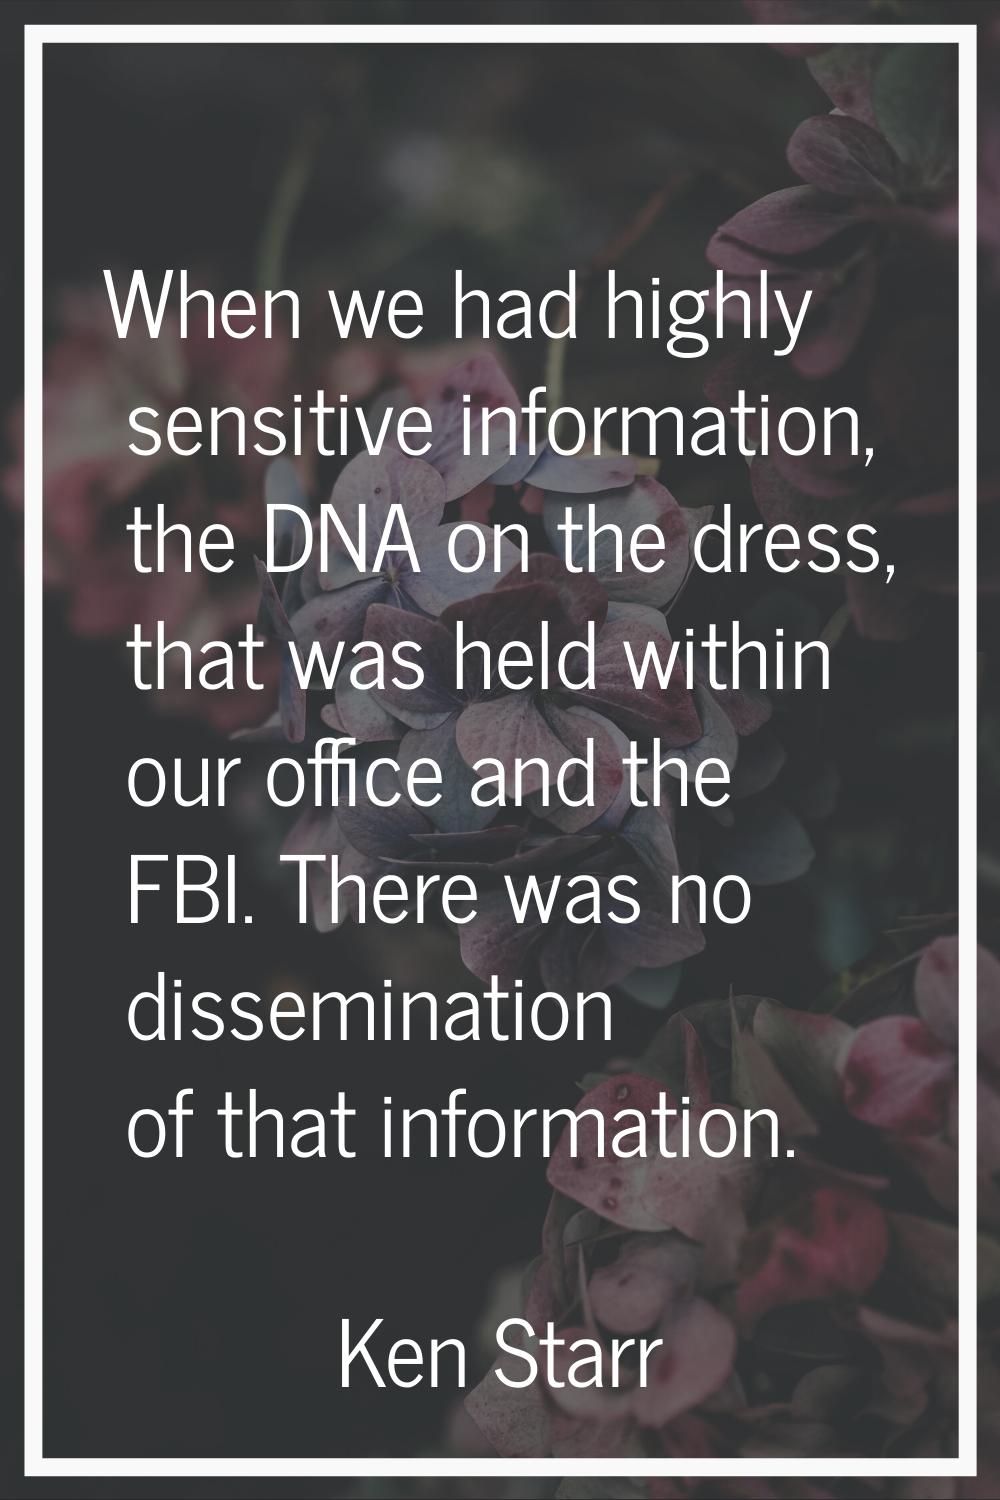 When we had highly sensitive information, the DNA on the dress, that was held within our office and